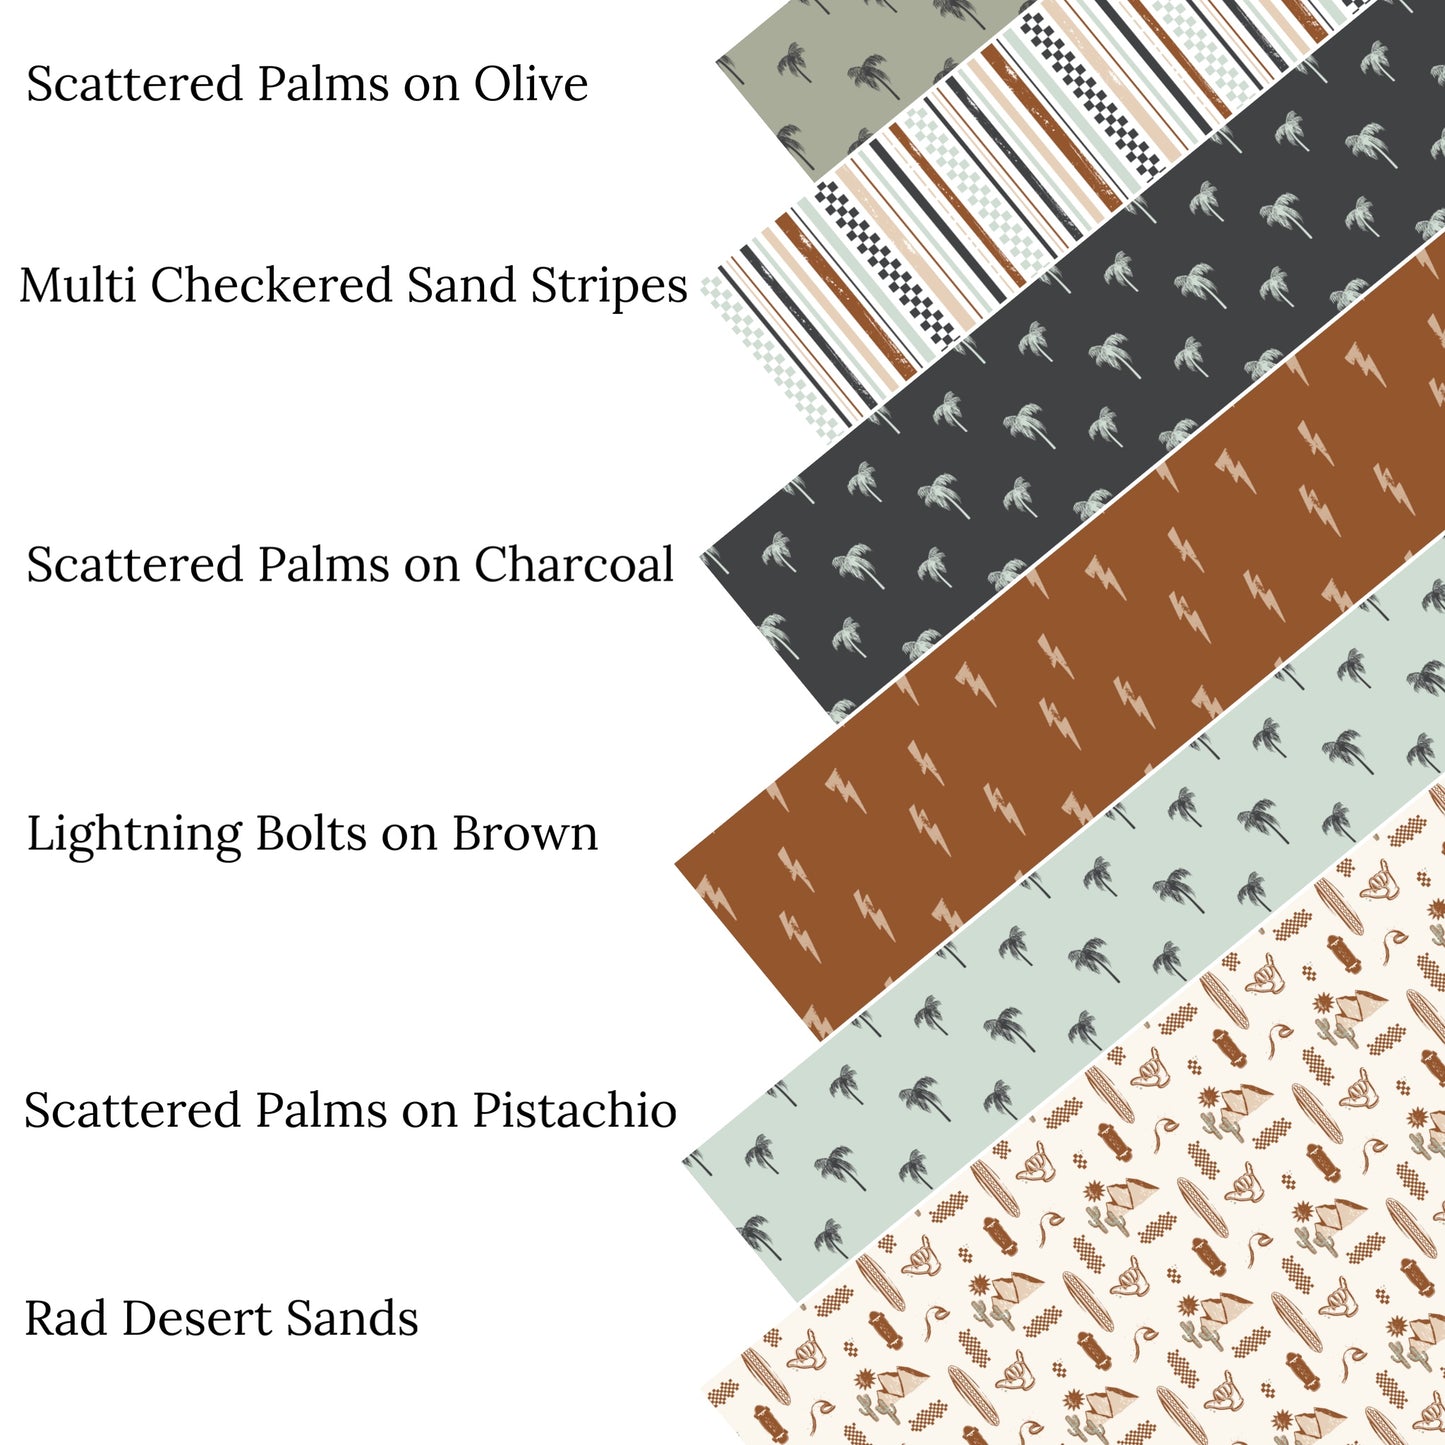 Scattered Palms on Olive Faux Leather Sheets